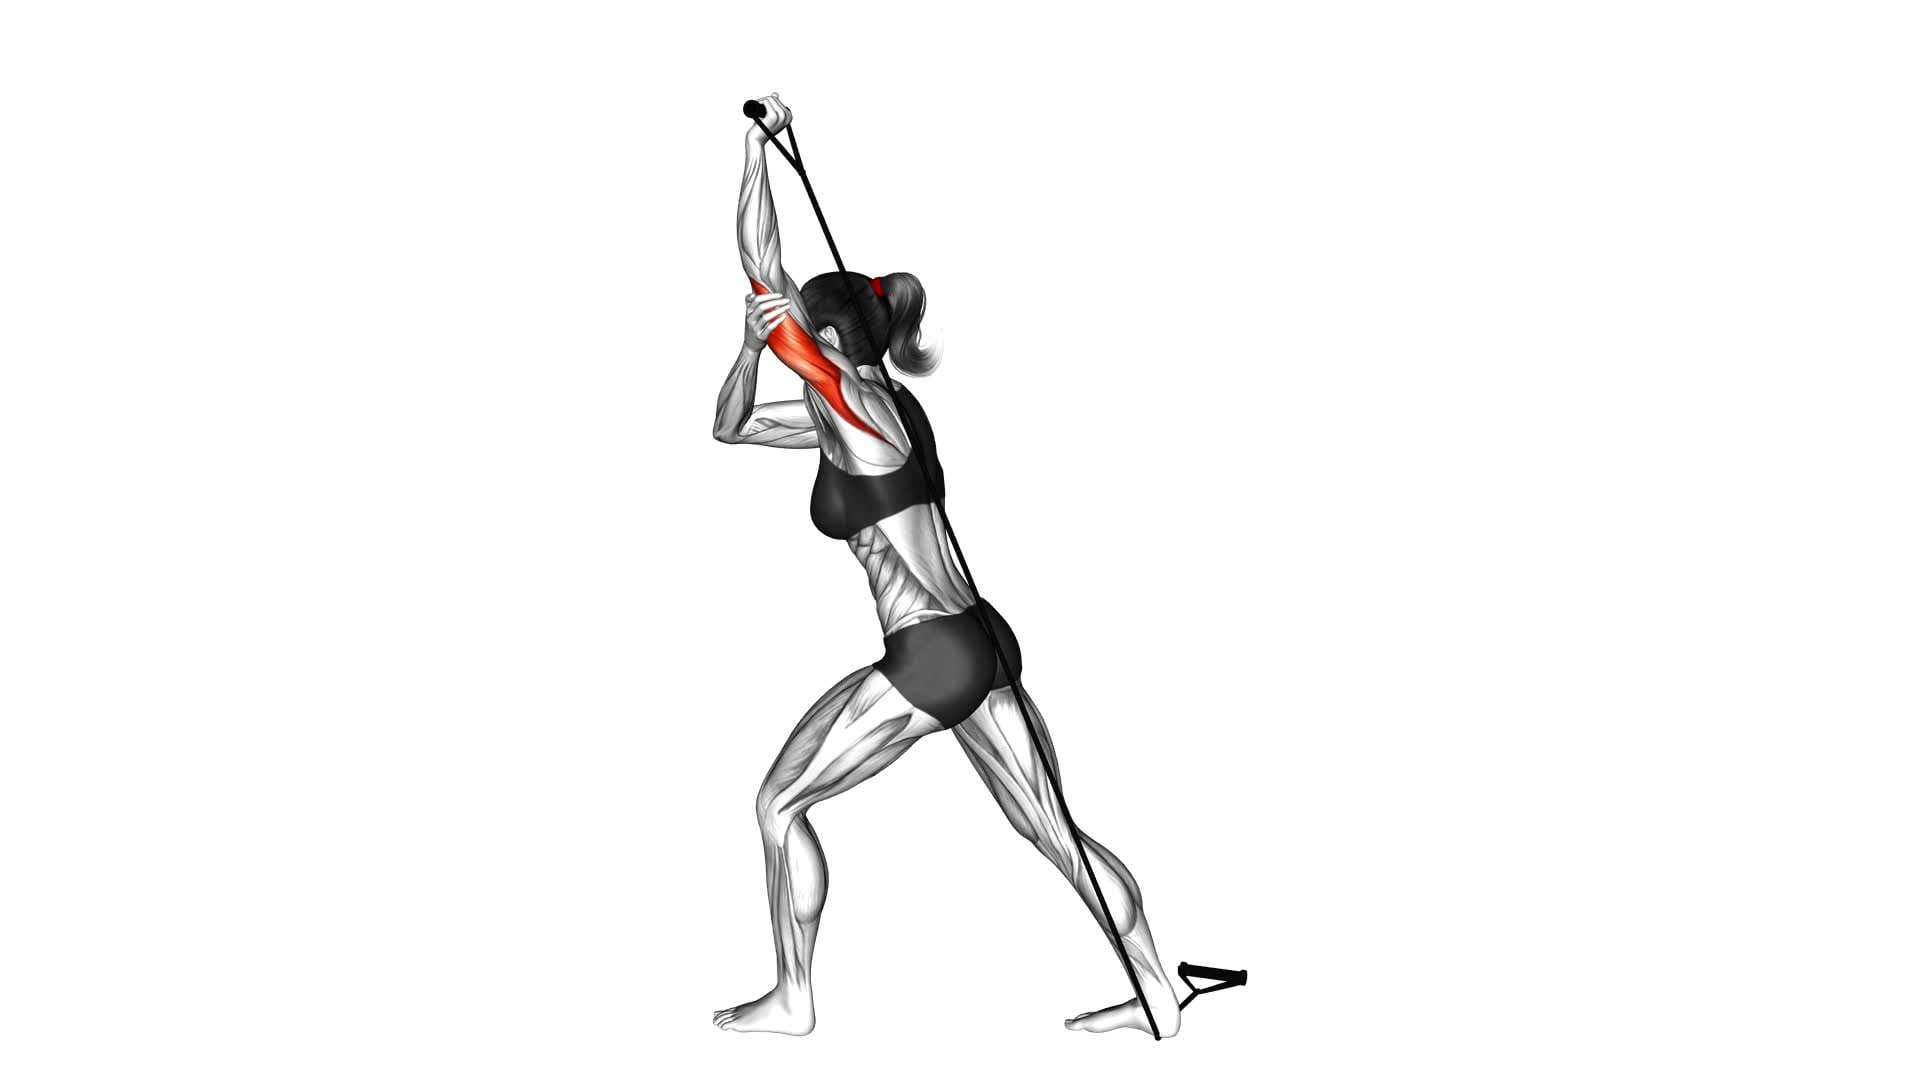 Band Overhead Single Arm Triceps Extension (VERSION 2) (female) - Video Exercise Guide & Tips